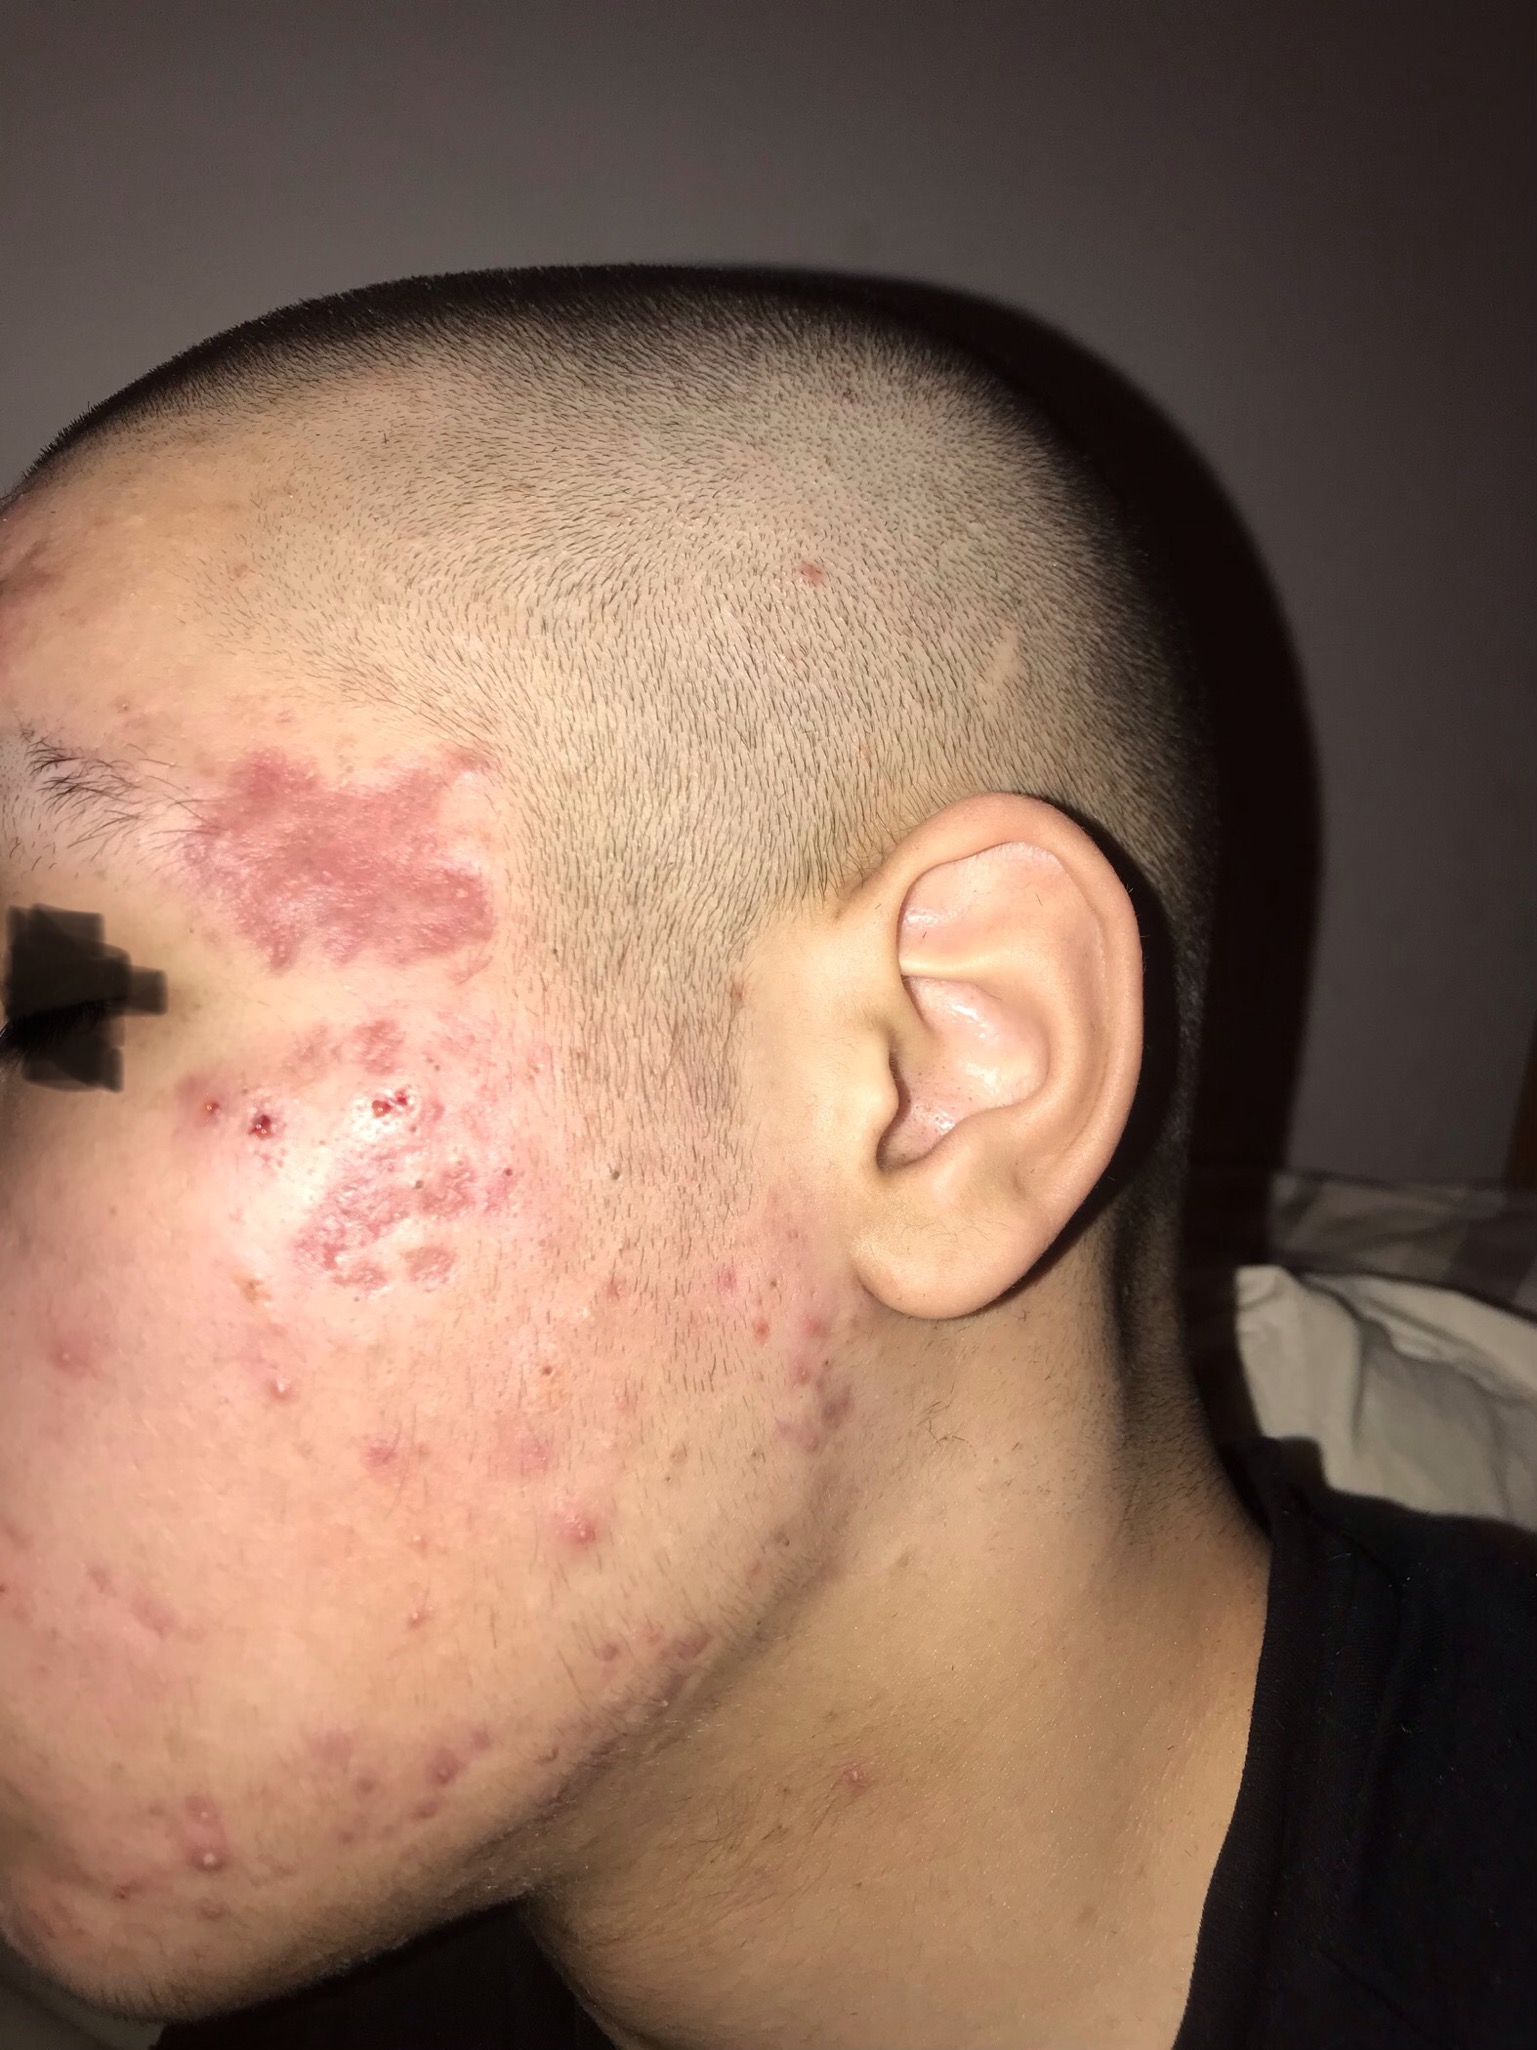 What acne scars are these and what treatments are best for my scars